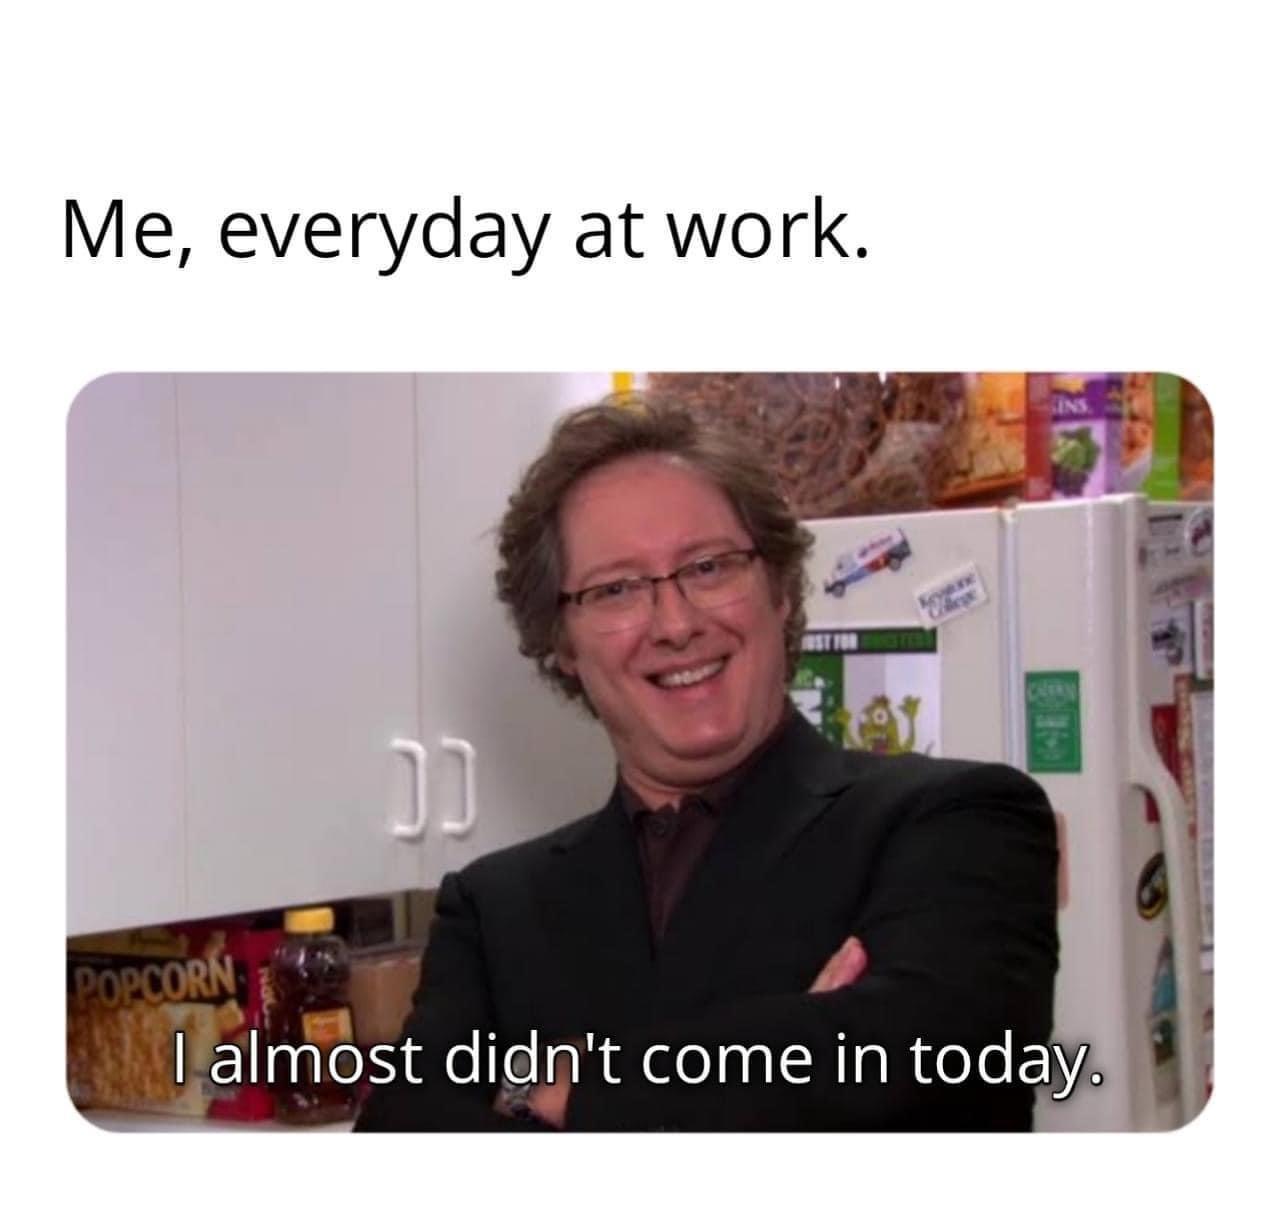 Fresh Pics And Memes - me everyday at work - Me, everyday at work. Popcorn I almost didn't come in today.